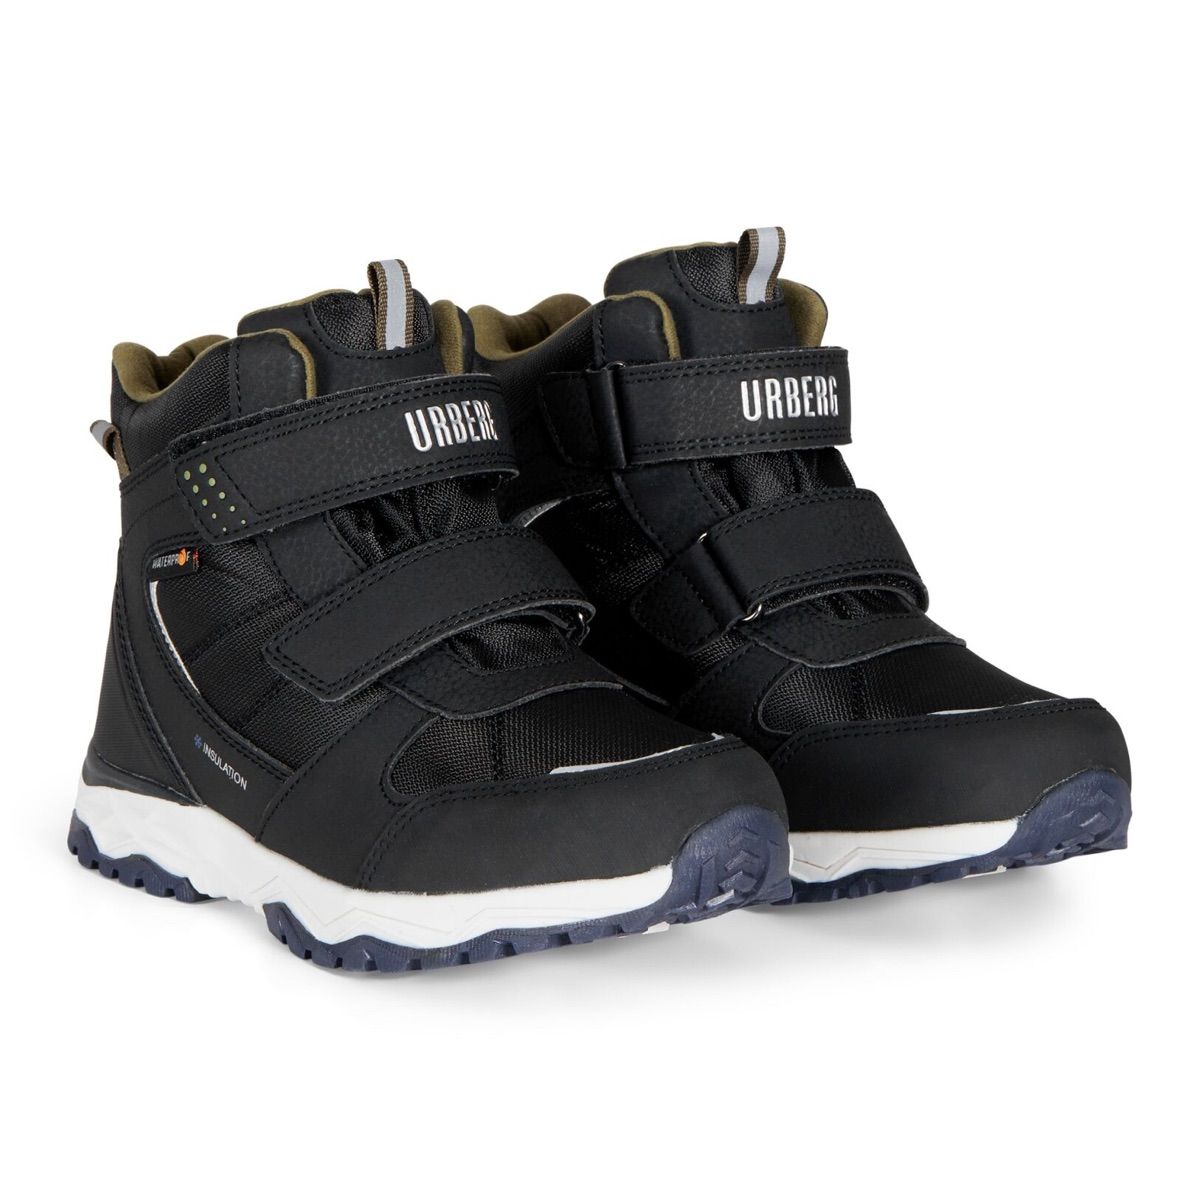 Urberg Ice Kid's Boot Black Beauty/Capers